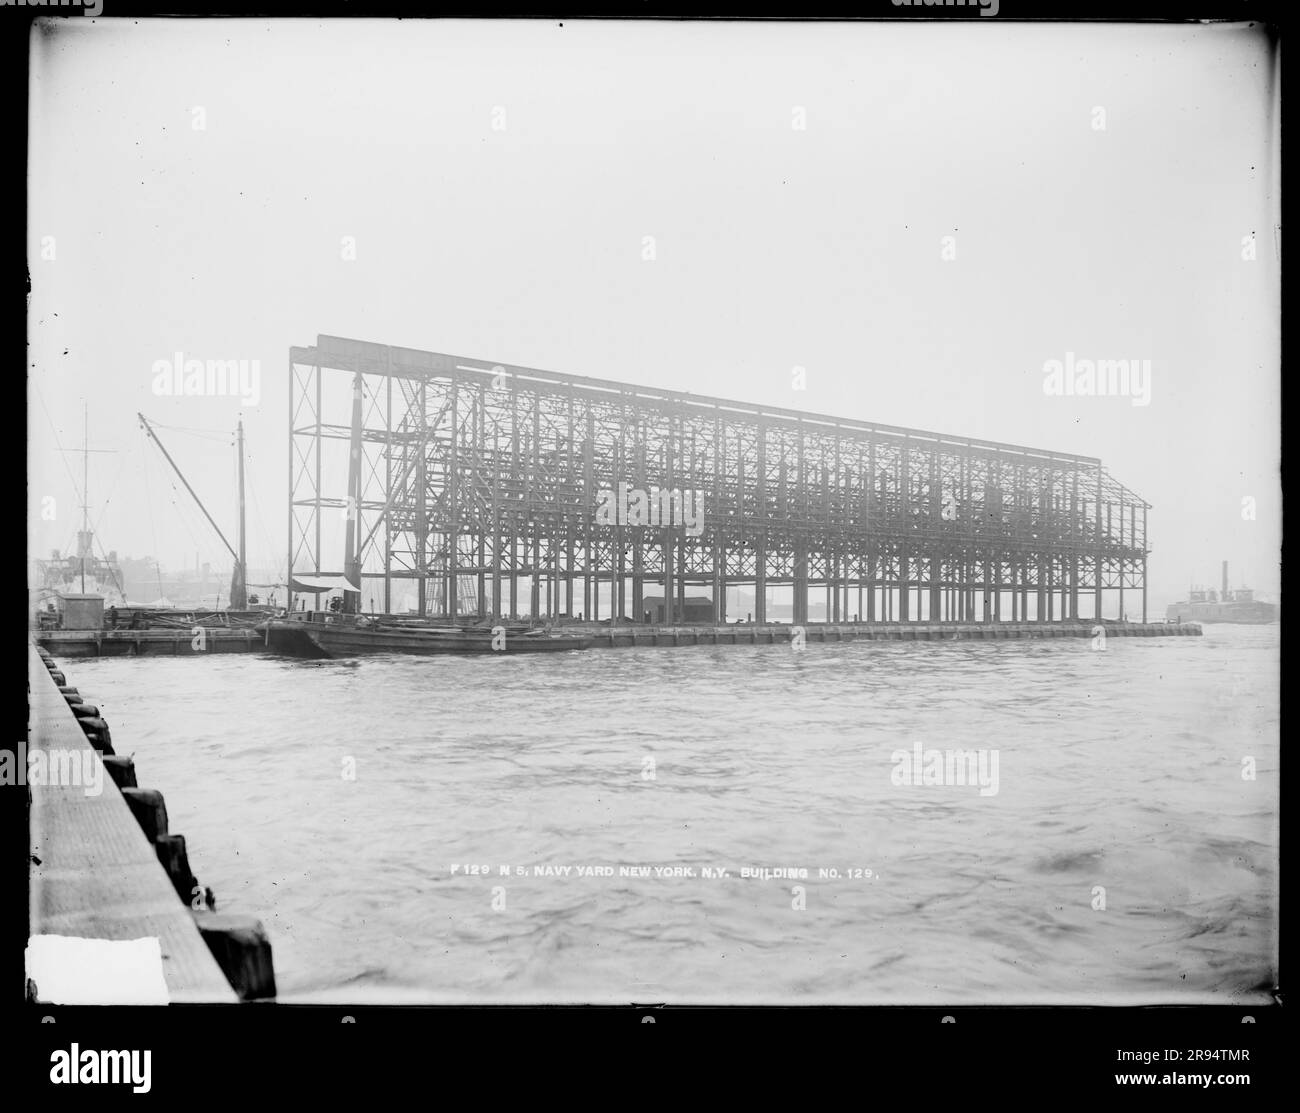 Building Number 129. Glass Plate Negatives of the Construction and Repair of Buildings, Facilities, and Vessels at the New York Navy Yard. Stock Photo